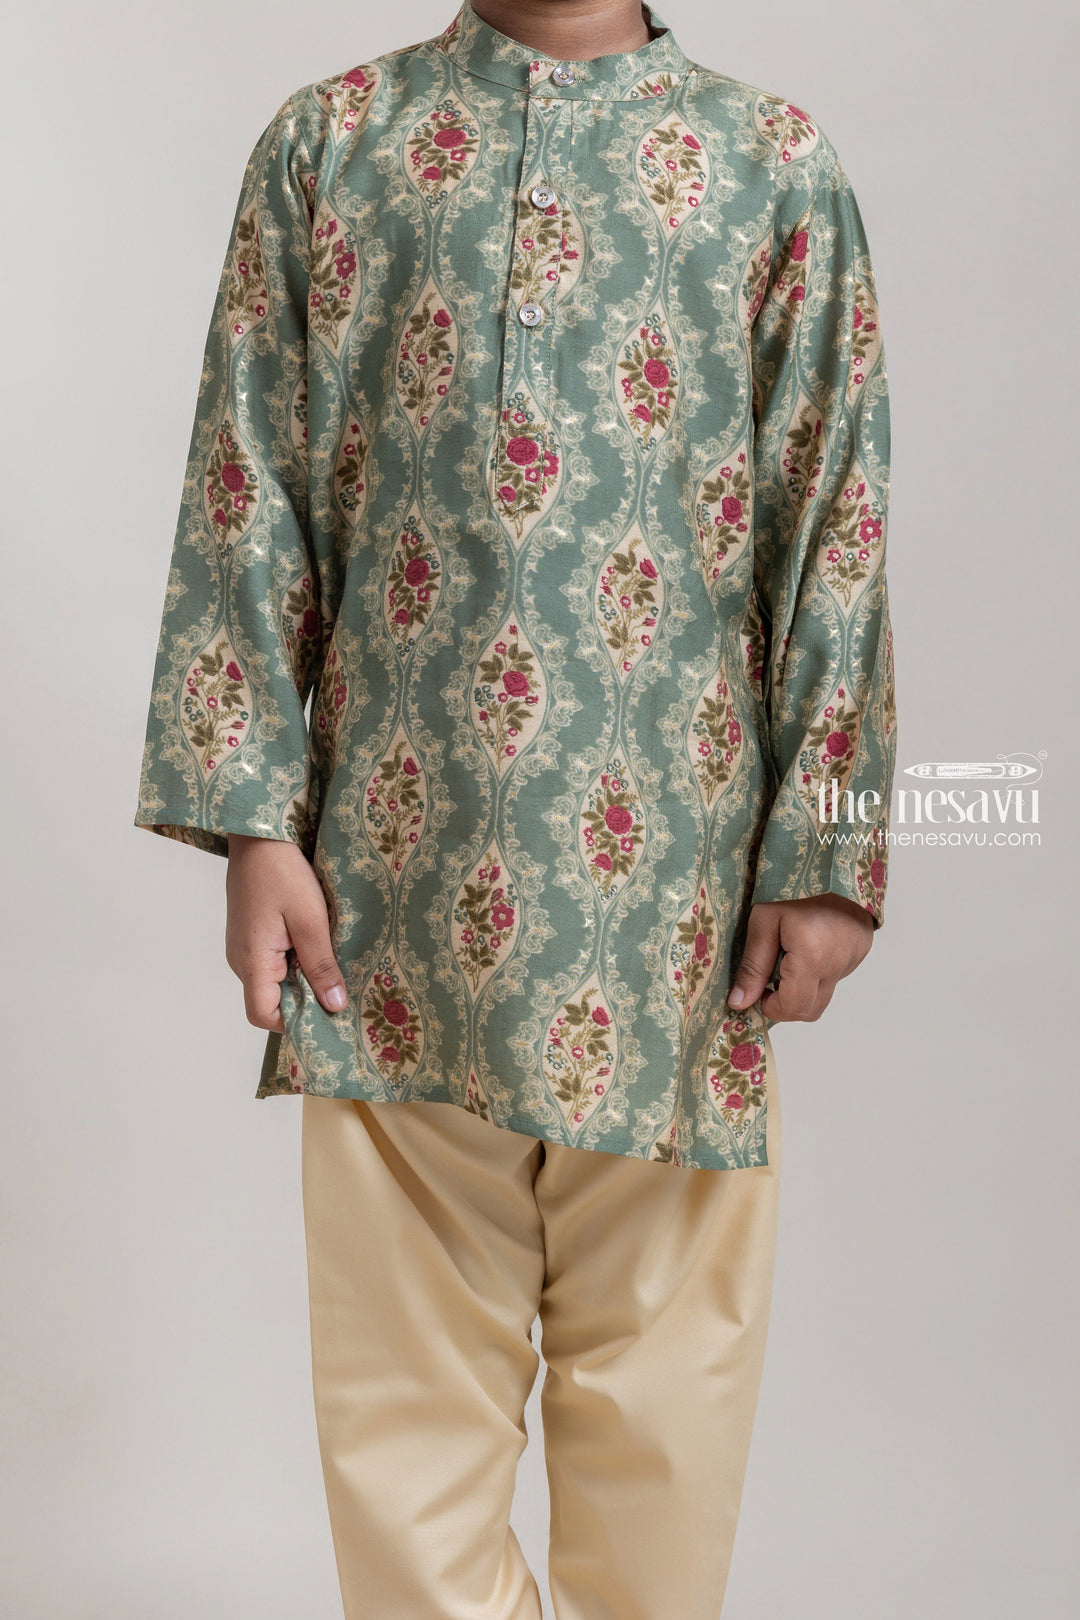 The Nesavu Boys Kurtha Set Stylish Green Floral Printed Ethnic Kurta With Beige Solid Pant For Boys Nesavu Stand Out from the Crowd with The Nesavu's Fashionable Ethnic Wear for Boys The Nesavu